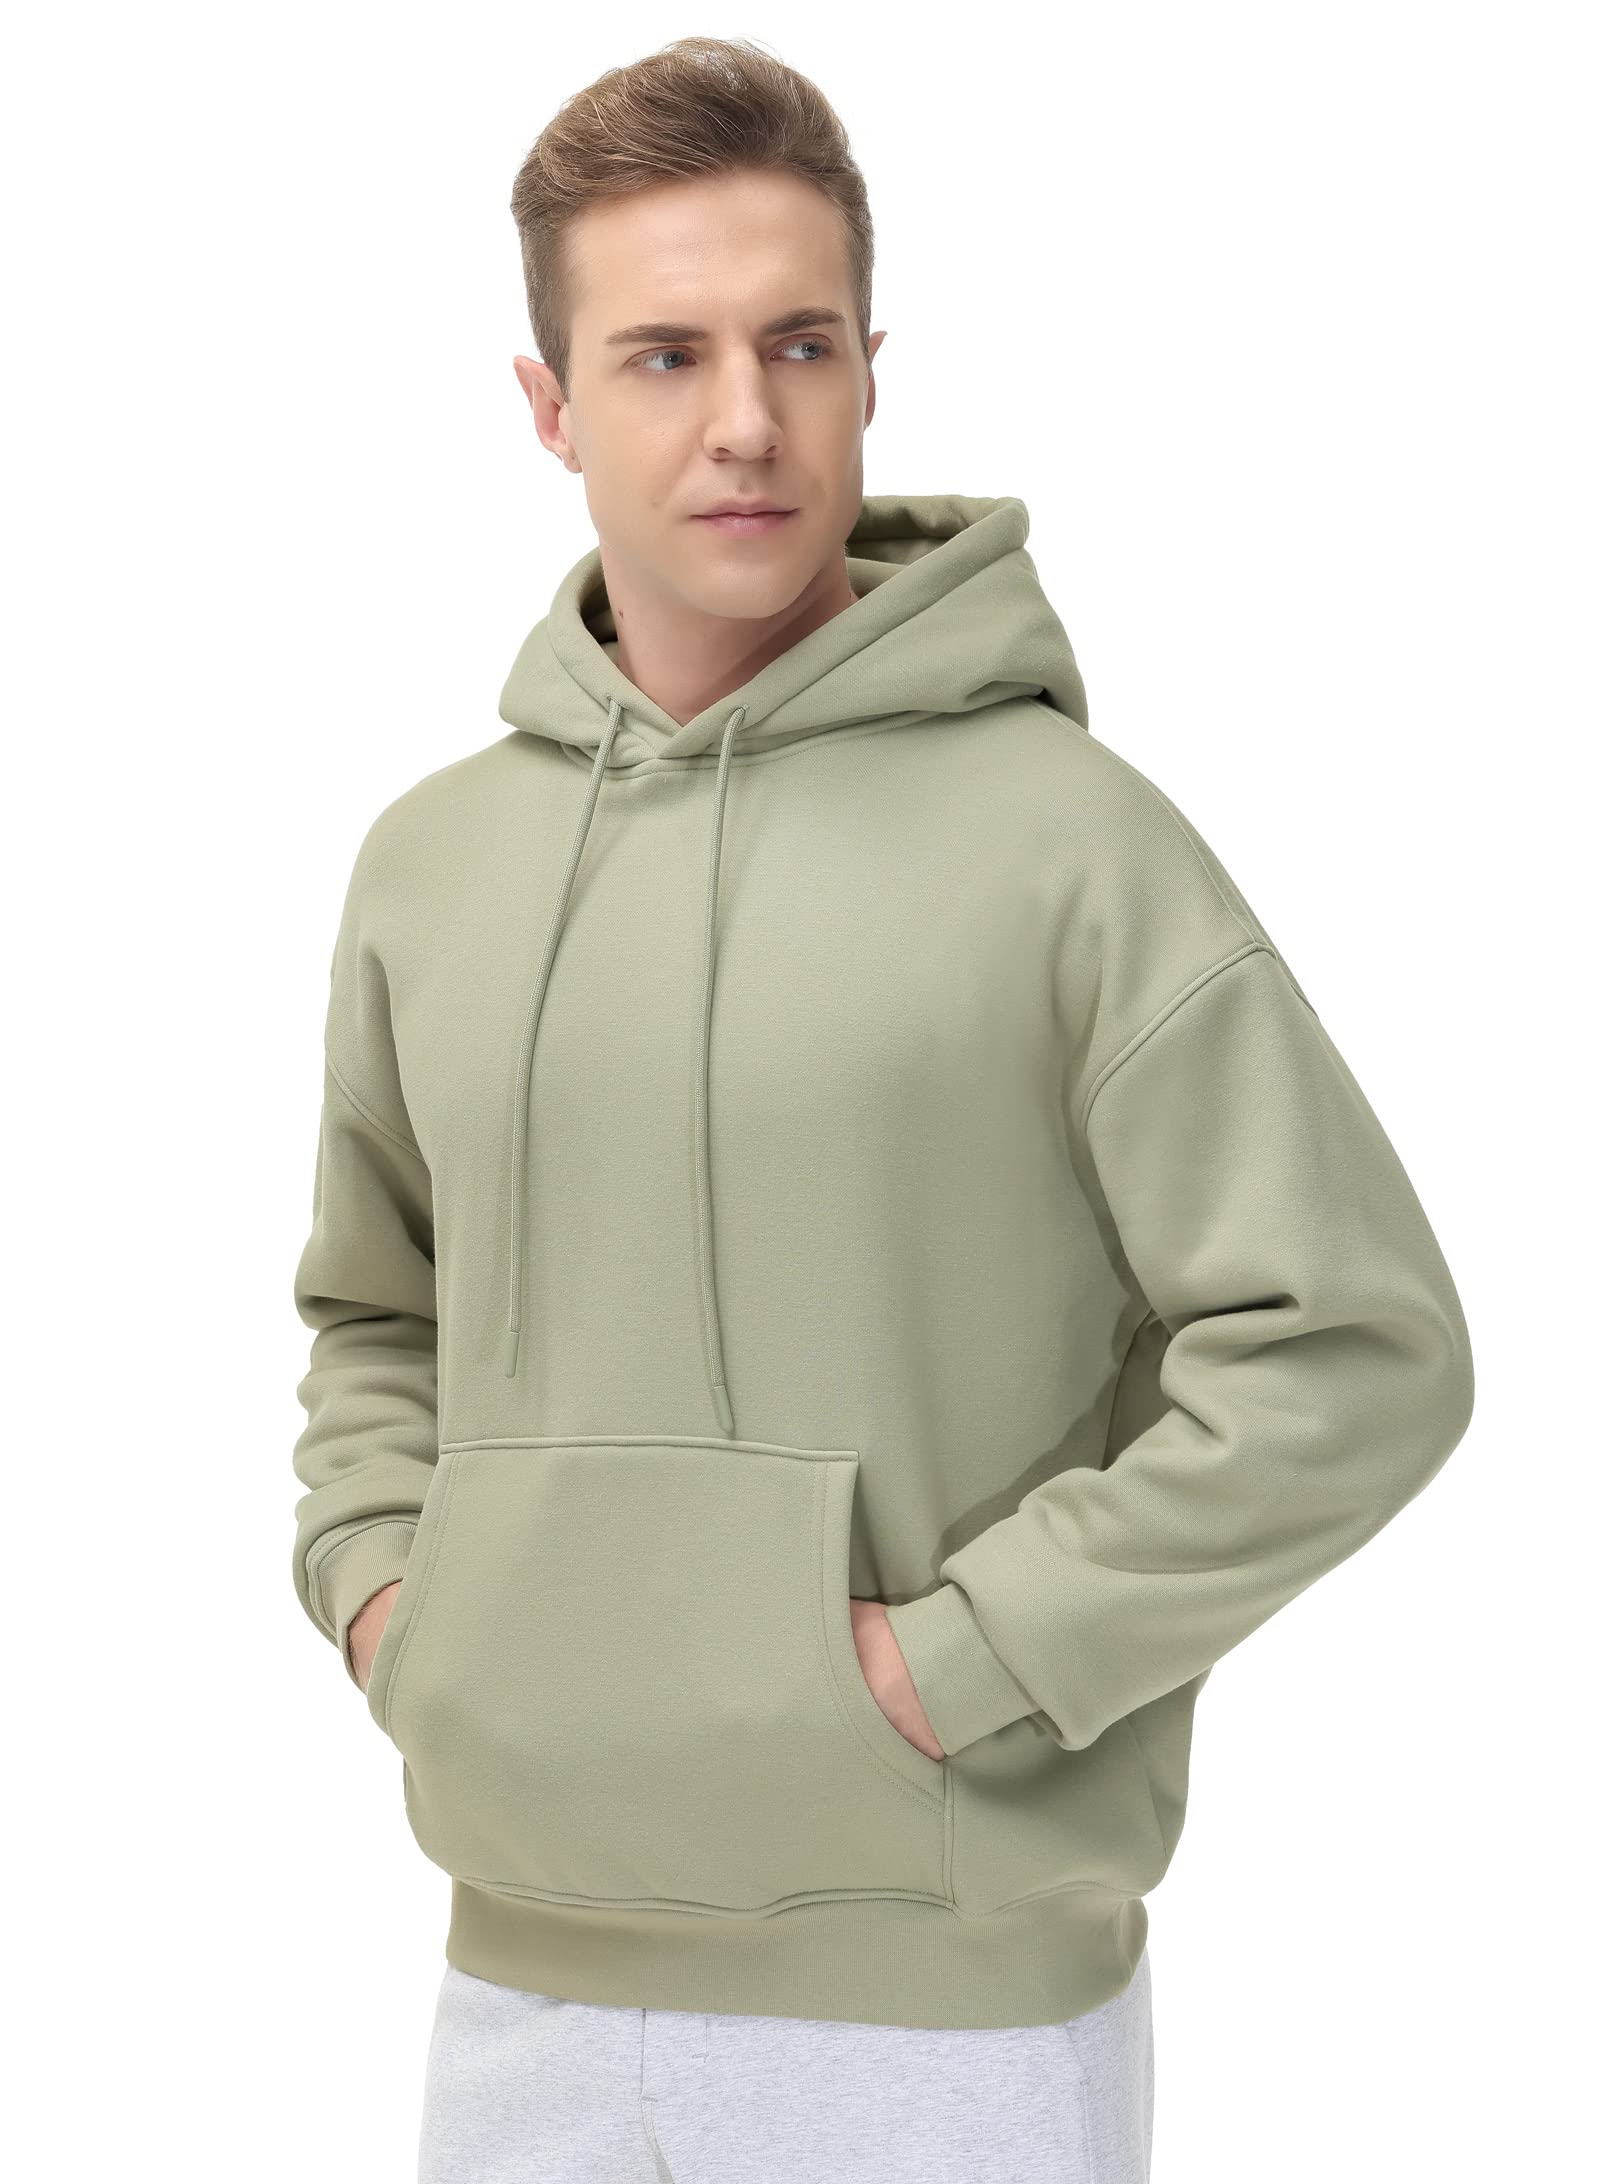 THE GYM PEOPLE Men's Fleece Pullover Hoodie Loose Fit Ultra Soft Hooded Sweatshirt With Pockets Light Green